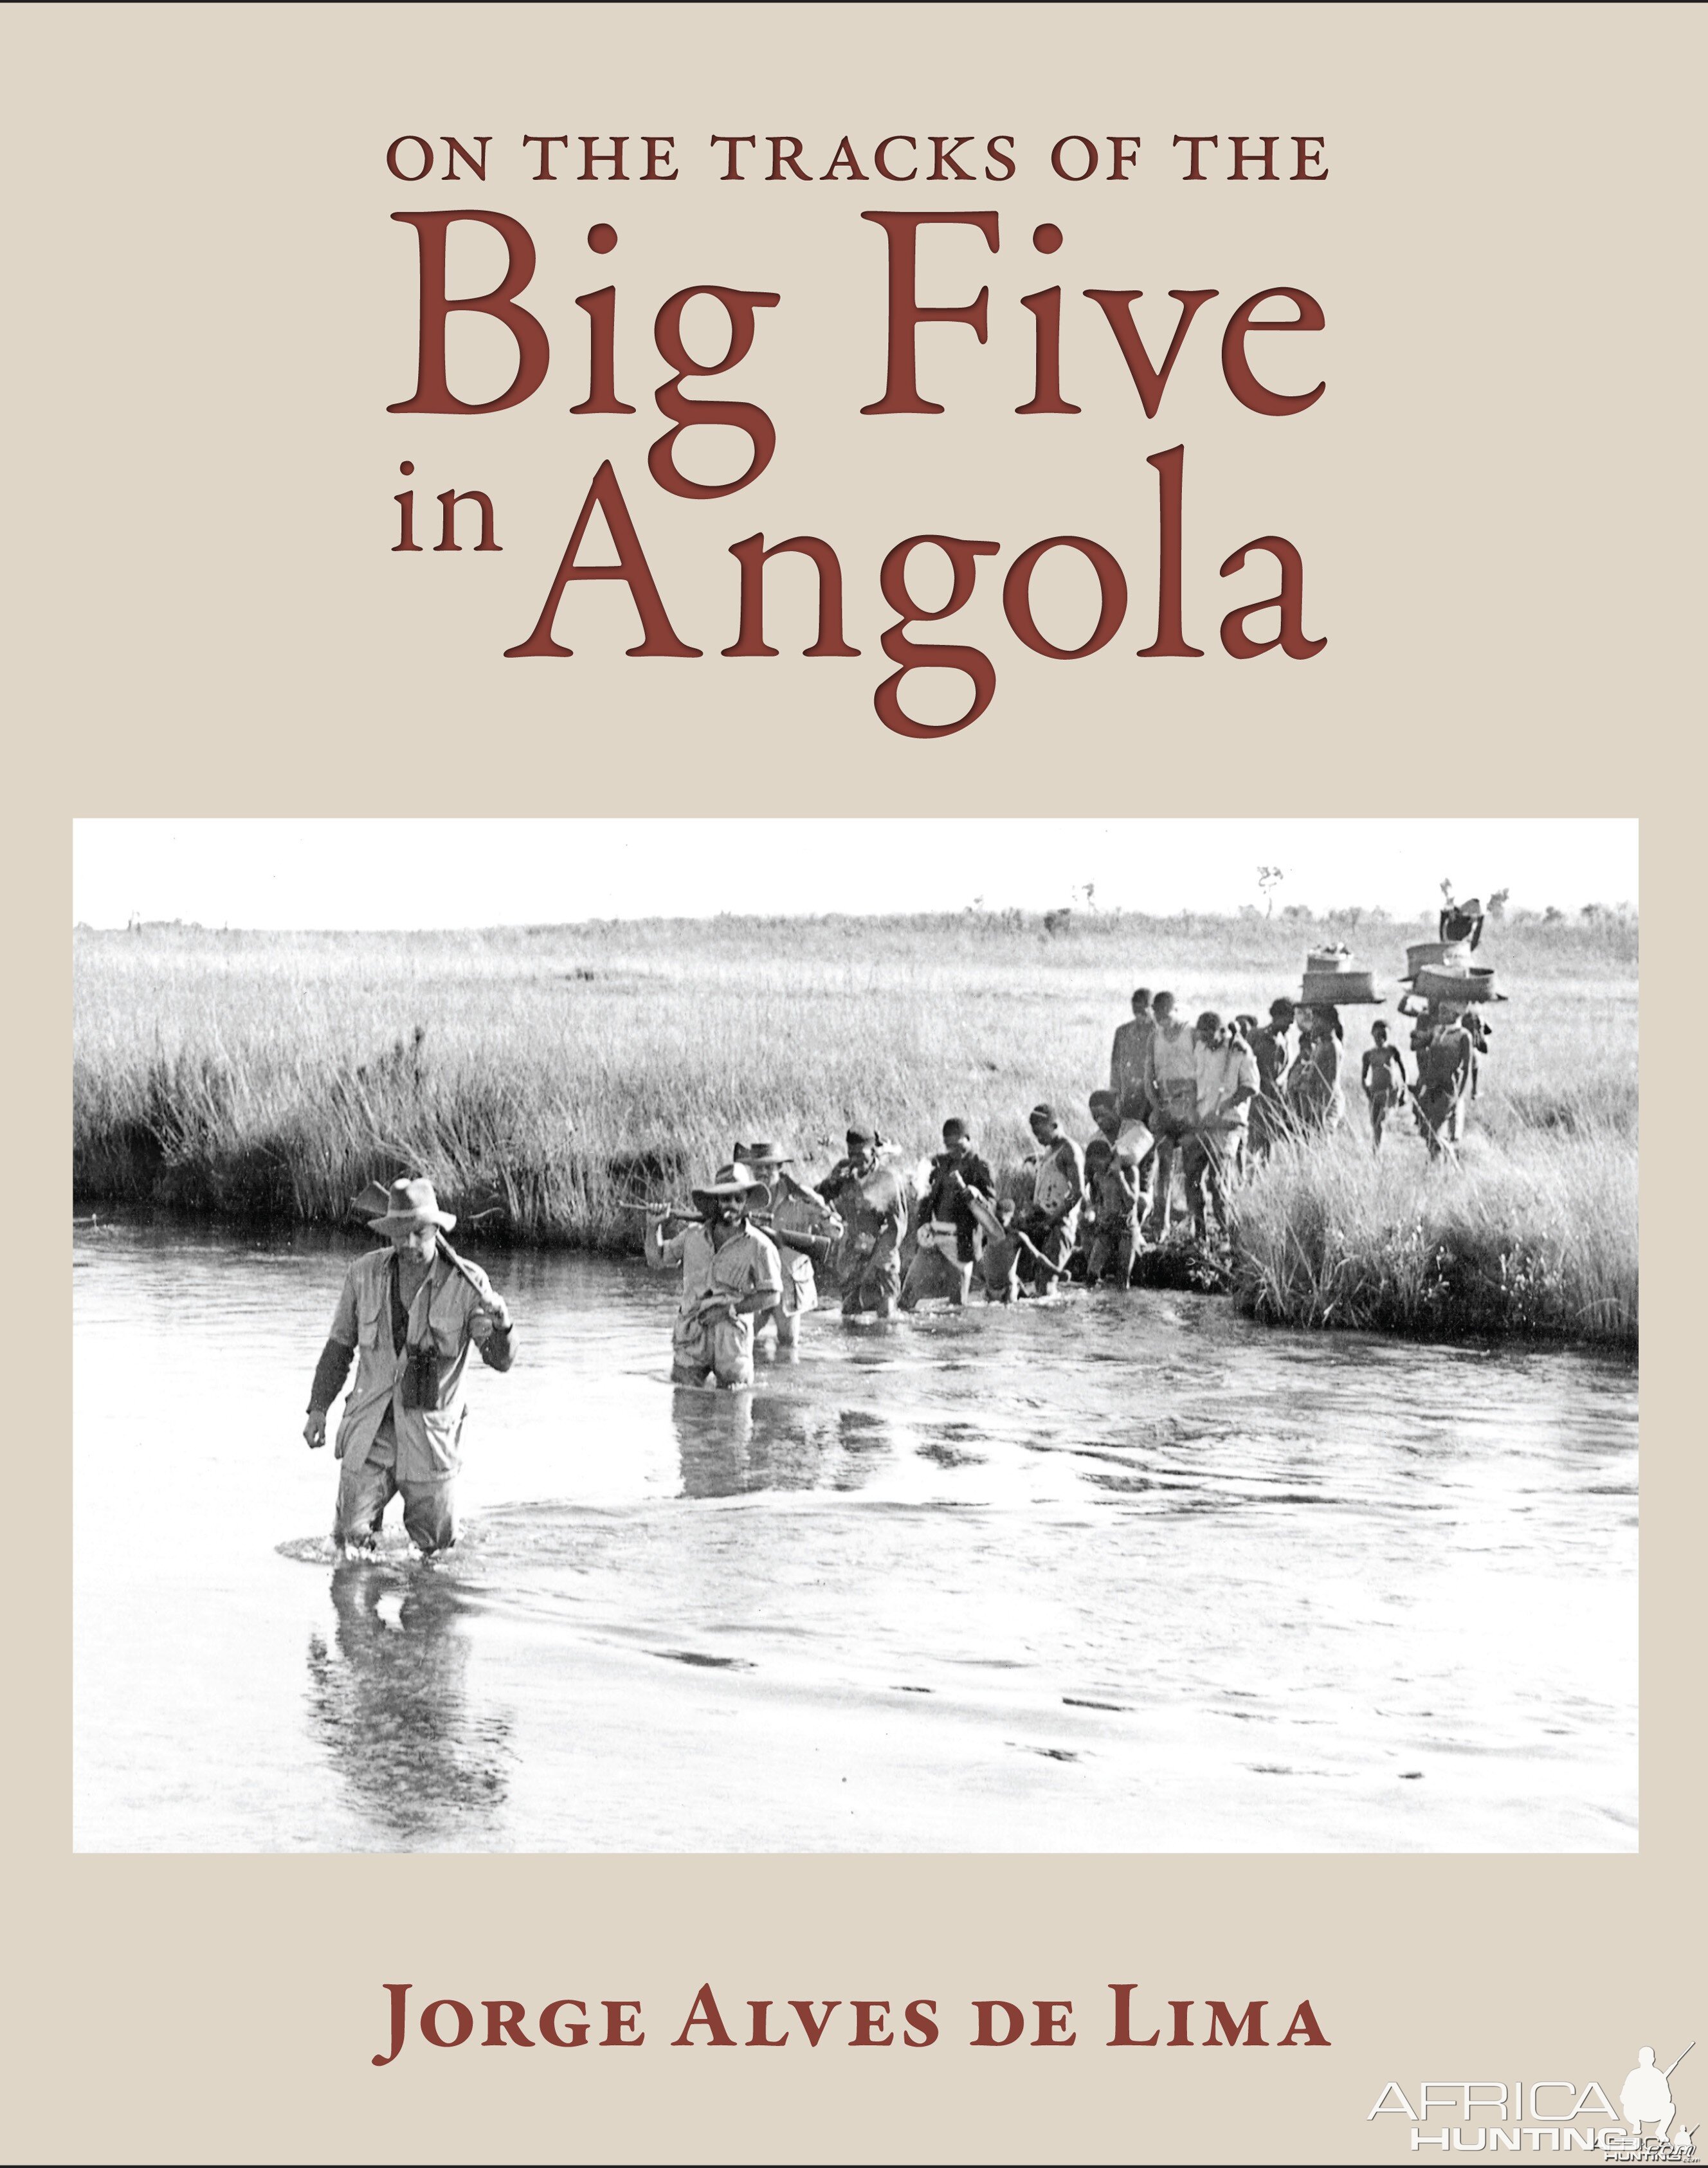 On the Tracks of the Big Five in Angola